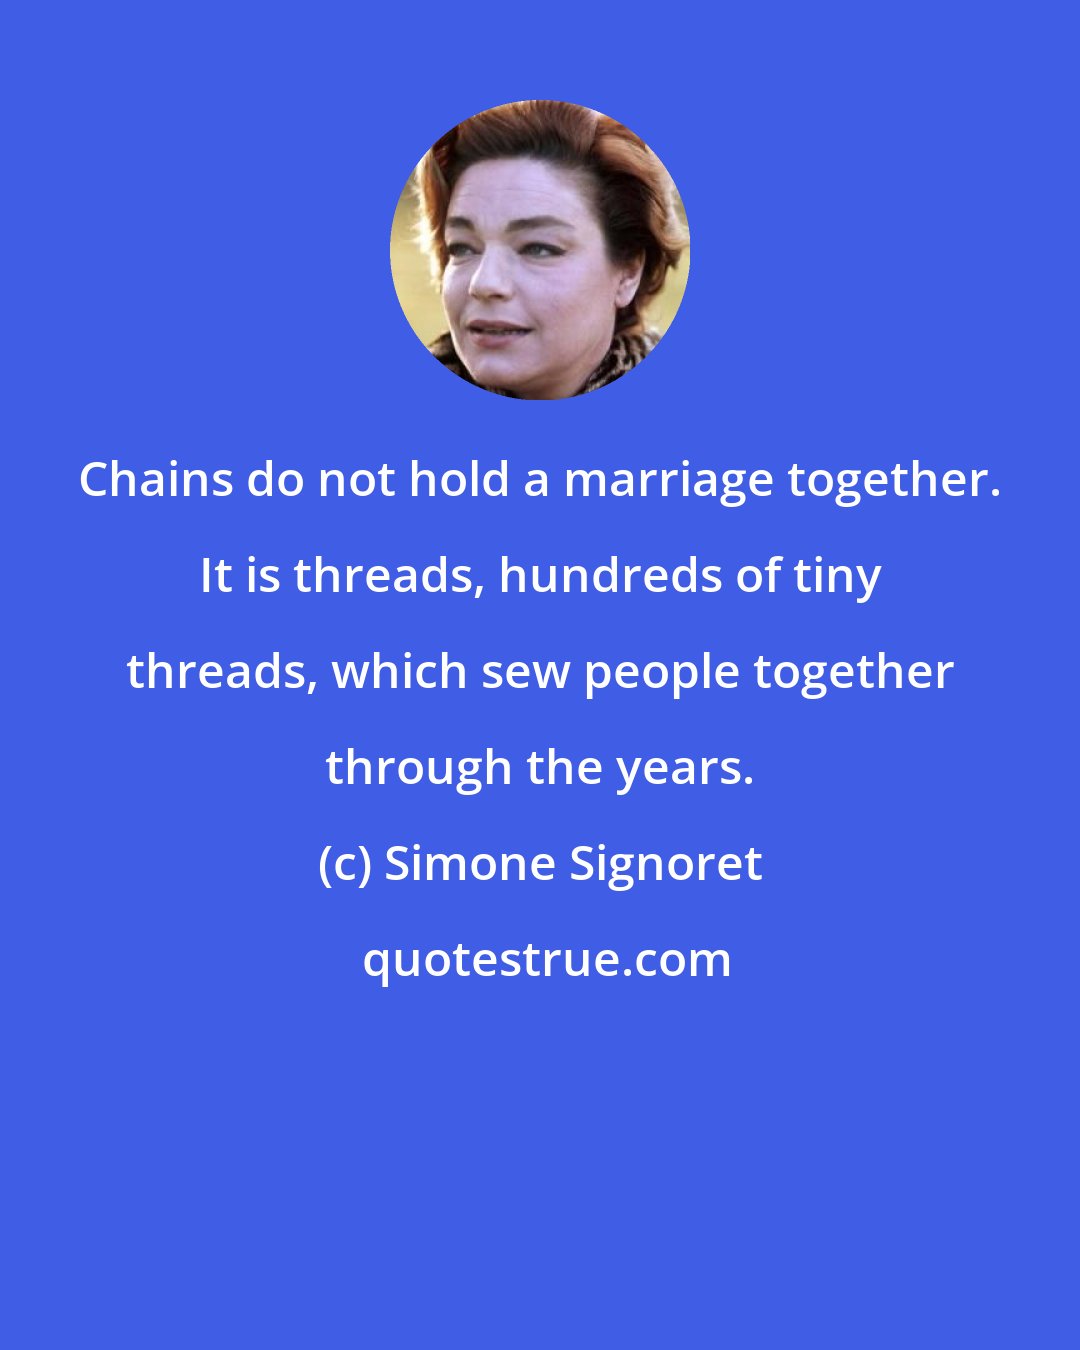 Simone Signoret: Chains do not hold a marriage together. It is threads, hundreds of tiny threads, which sew people together through the years.